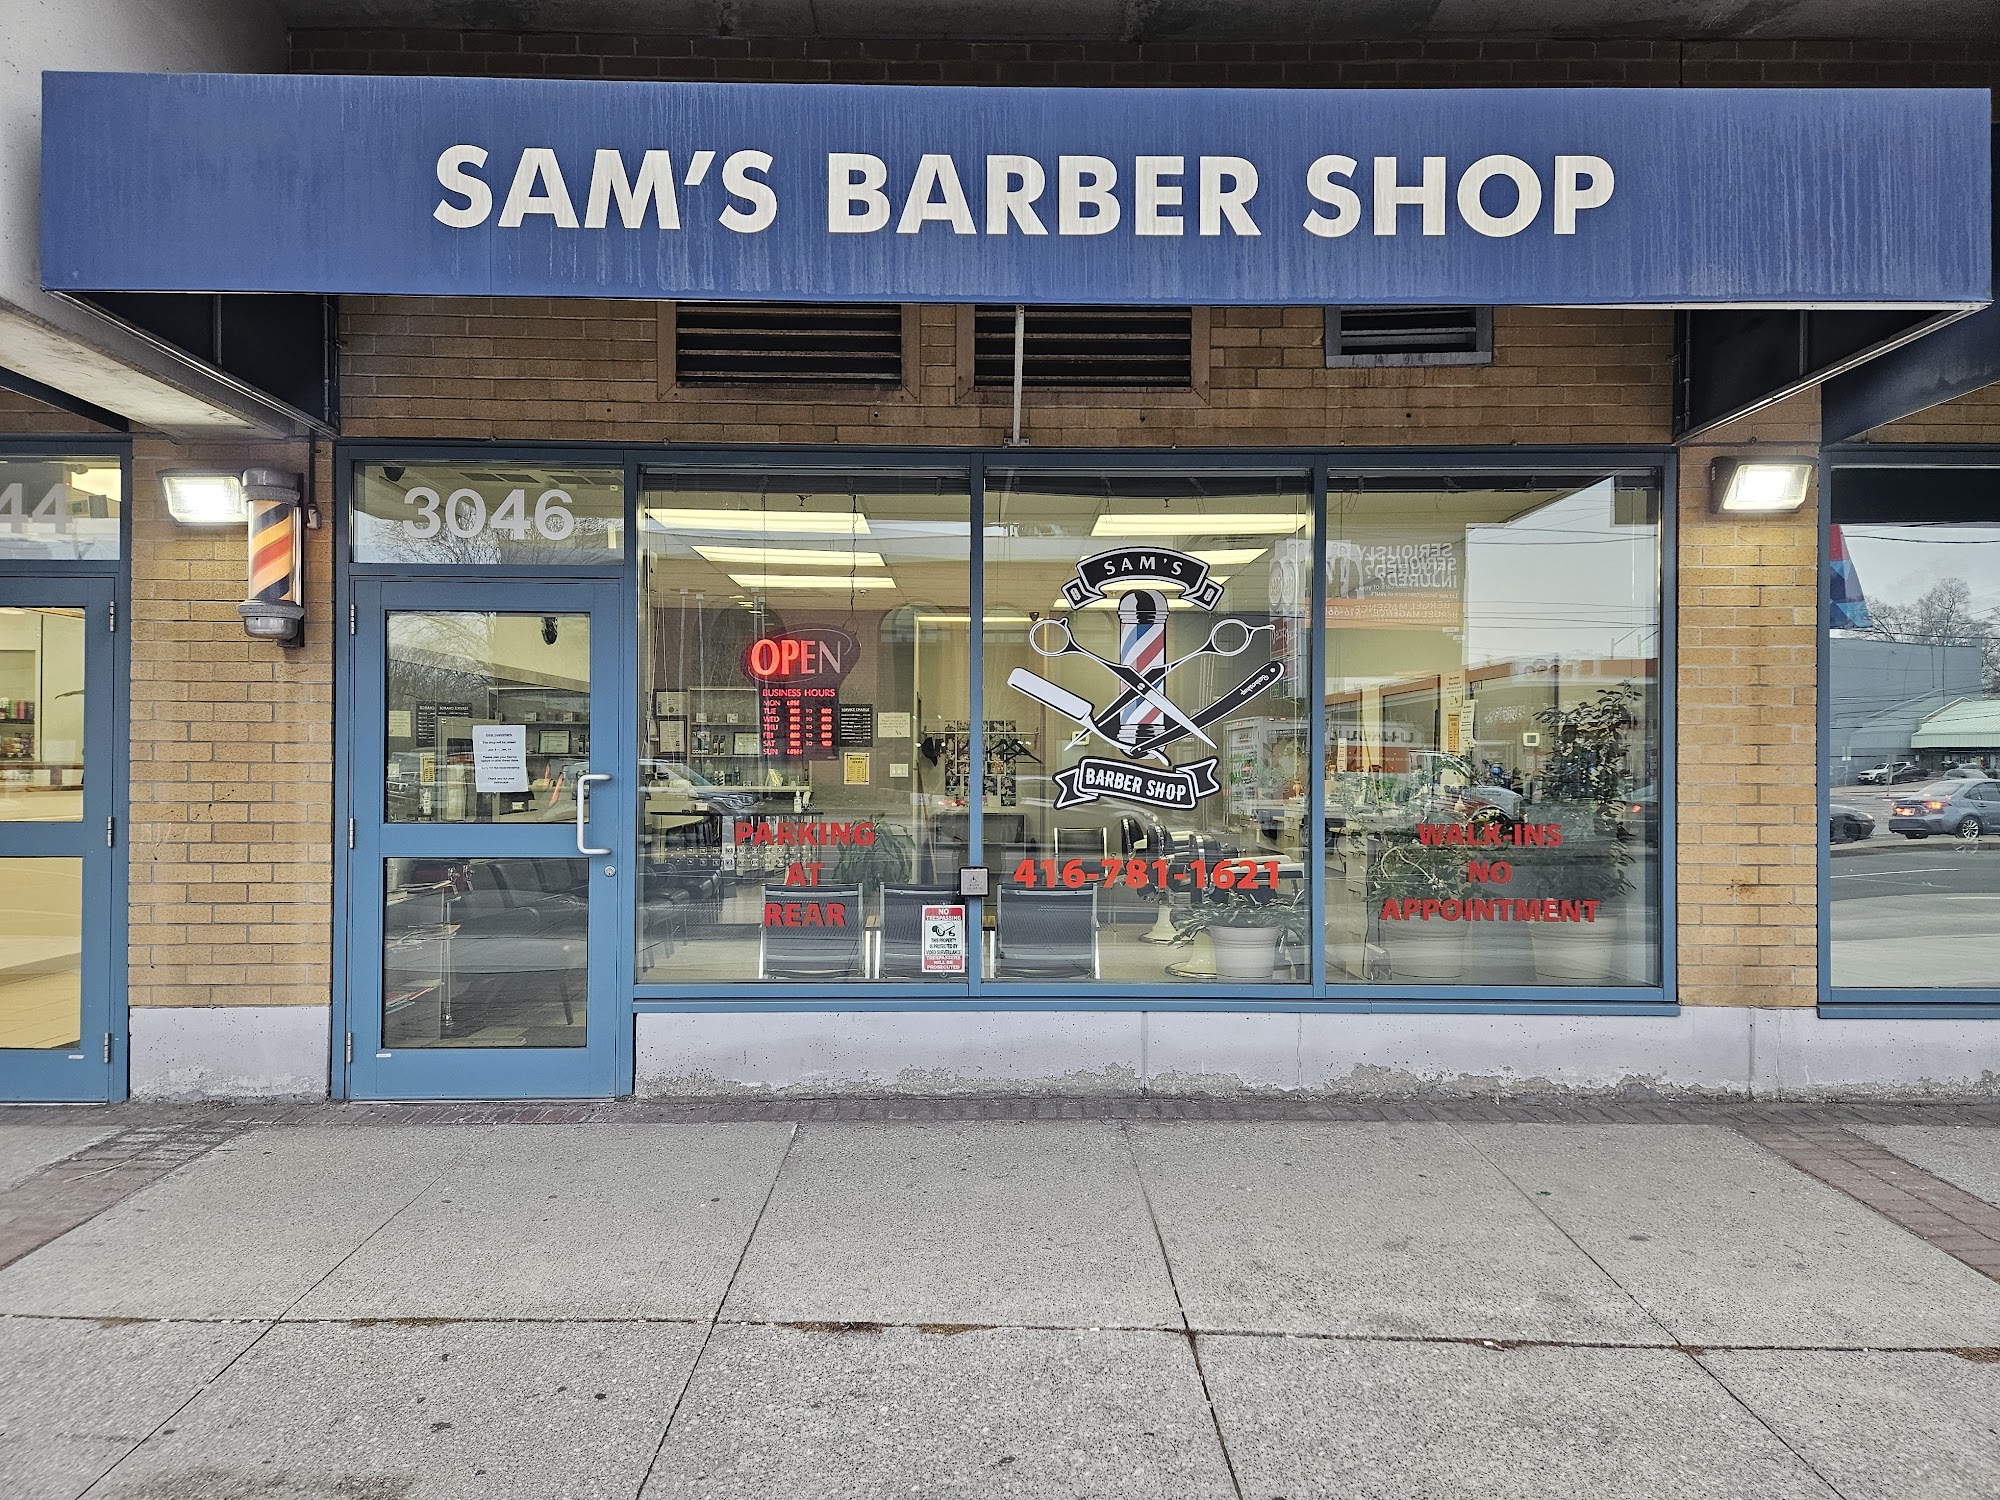 Sam's Barber Shop & Hairstyling